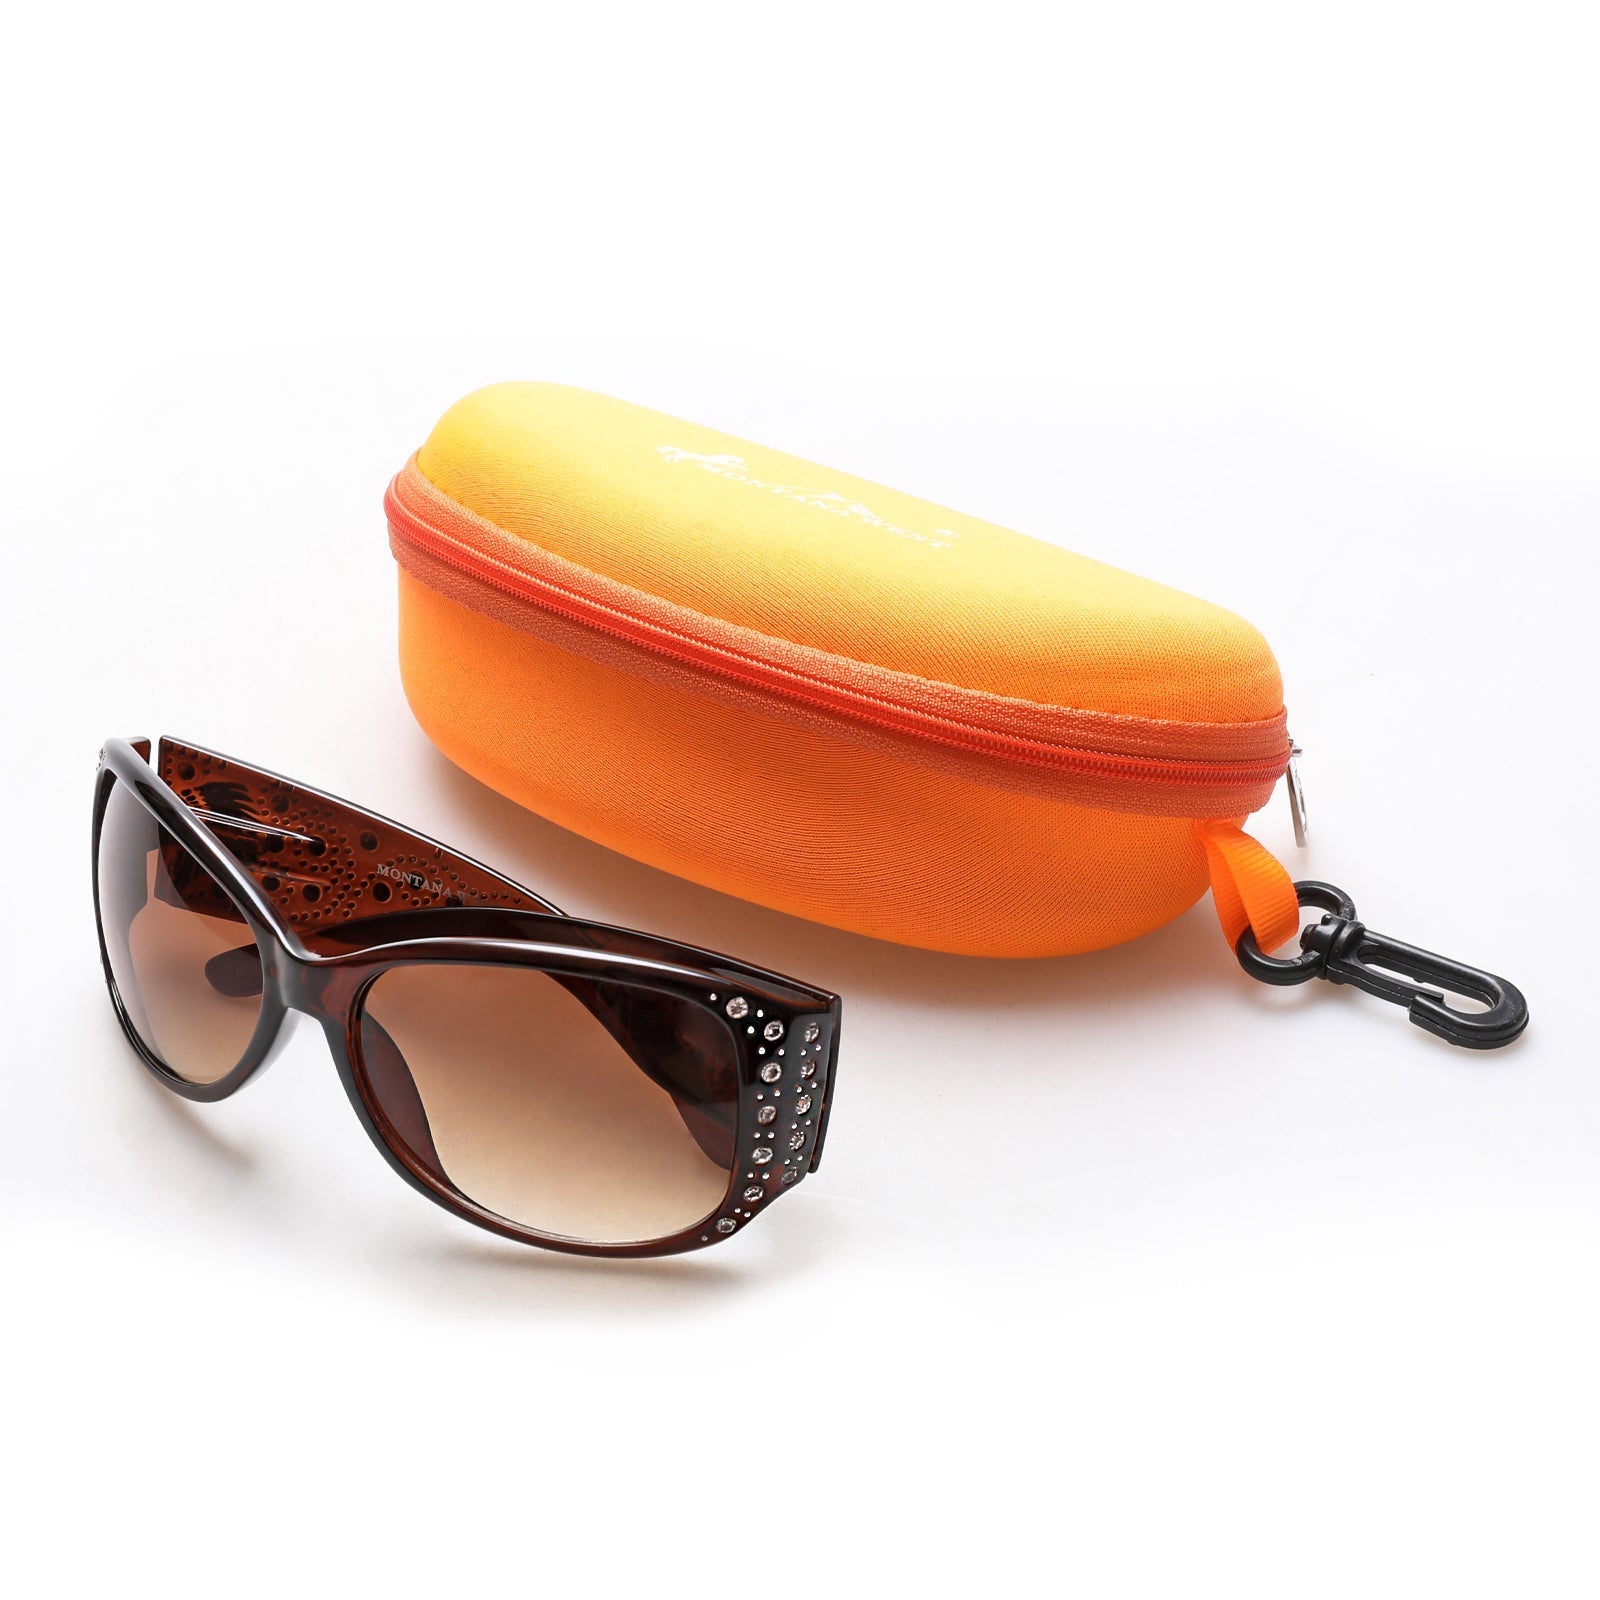 Montana West Indian Sunglasses For Women - Cowgirl Wear